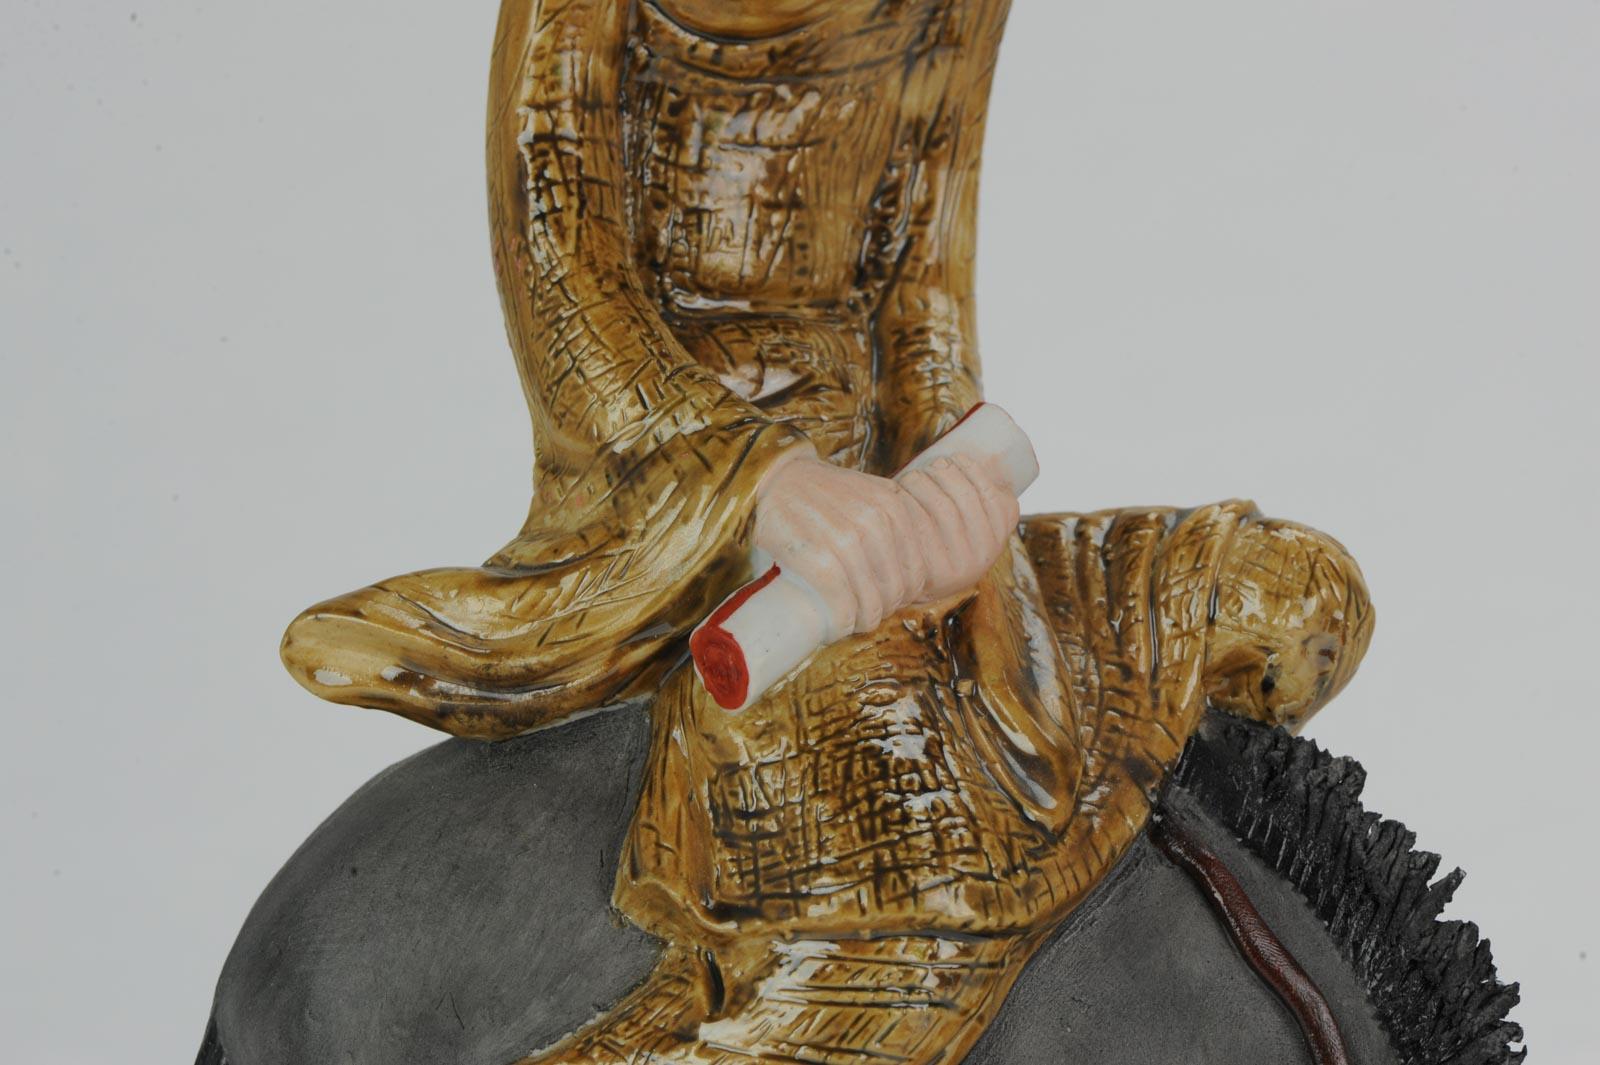 Chinese porcelain sculpture Man on Horse, Dated 1998, Created by Xu Jian Jian For Sale 10